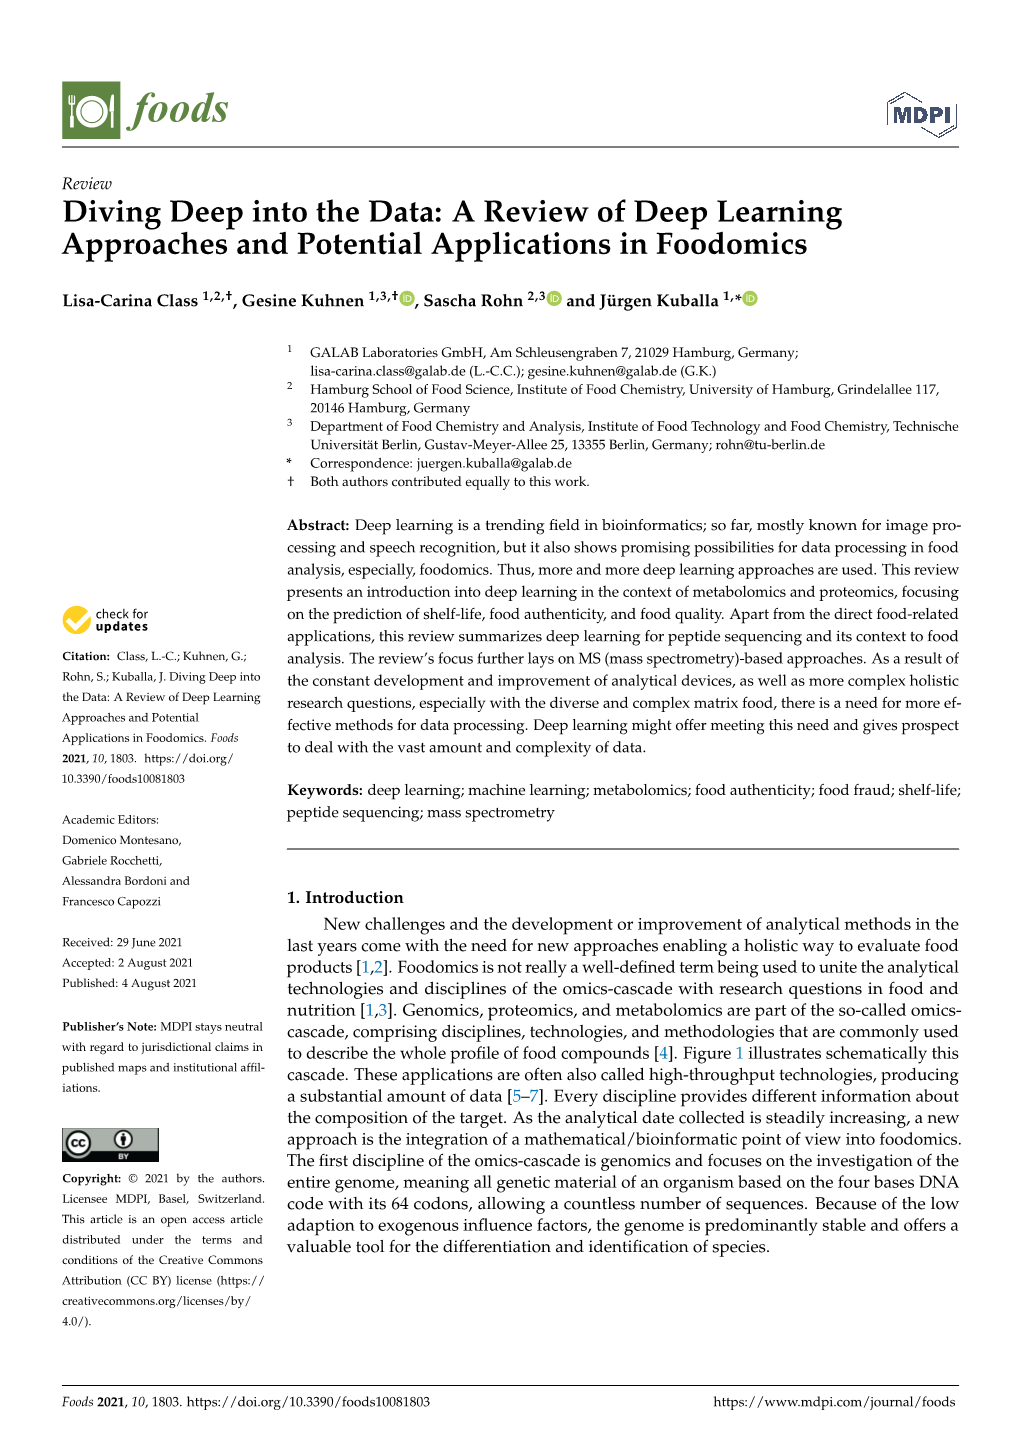 A Review of Deep Learning Approaches and Potential Applications in Foodomics